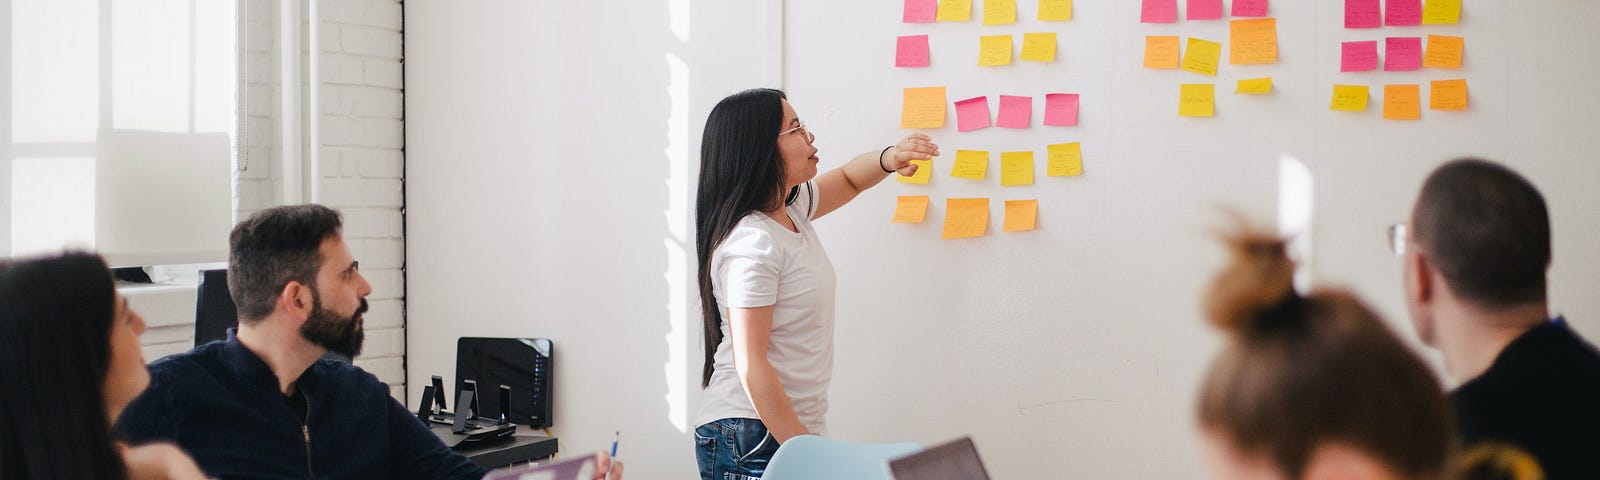 Woman leads UX collaboration exercise with sticky notes on a whiteboard.